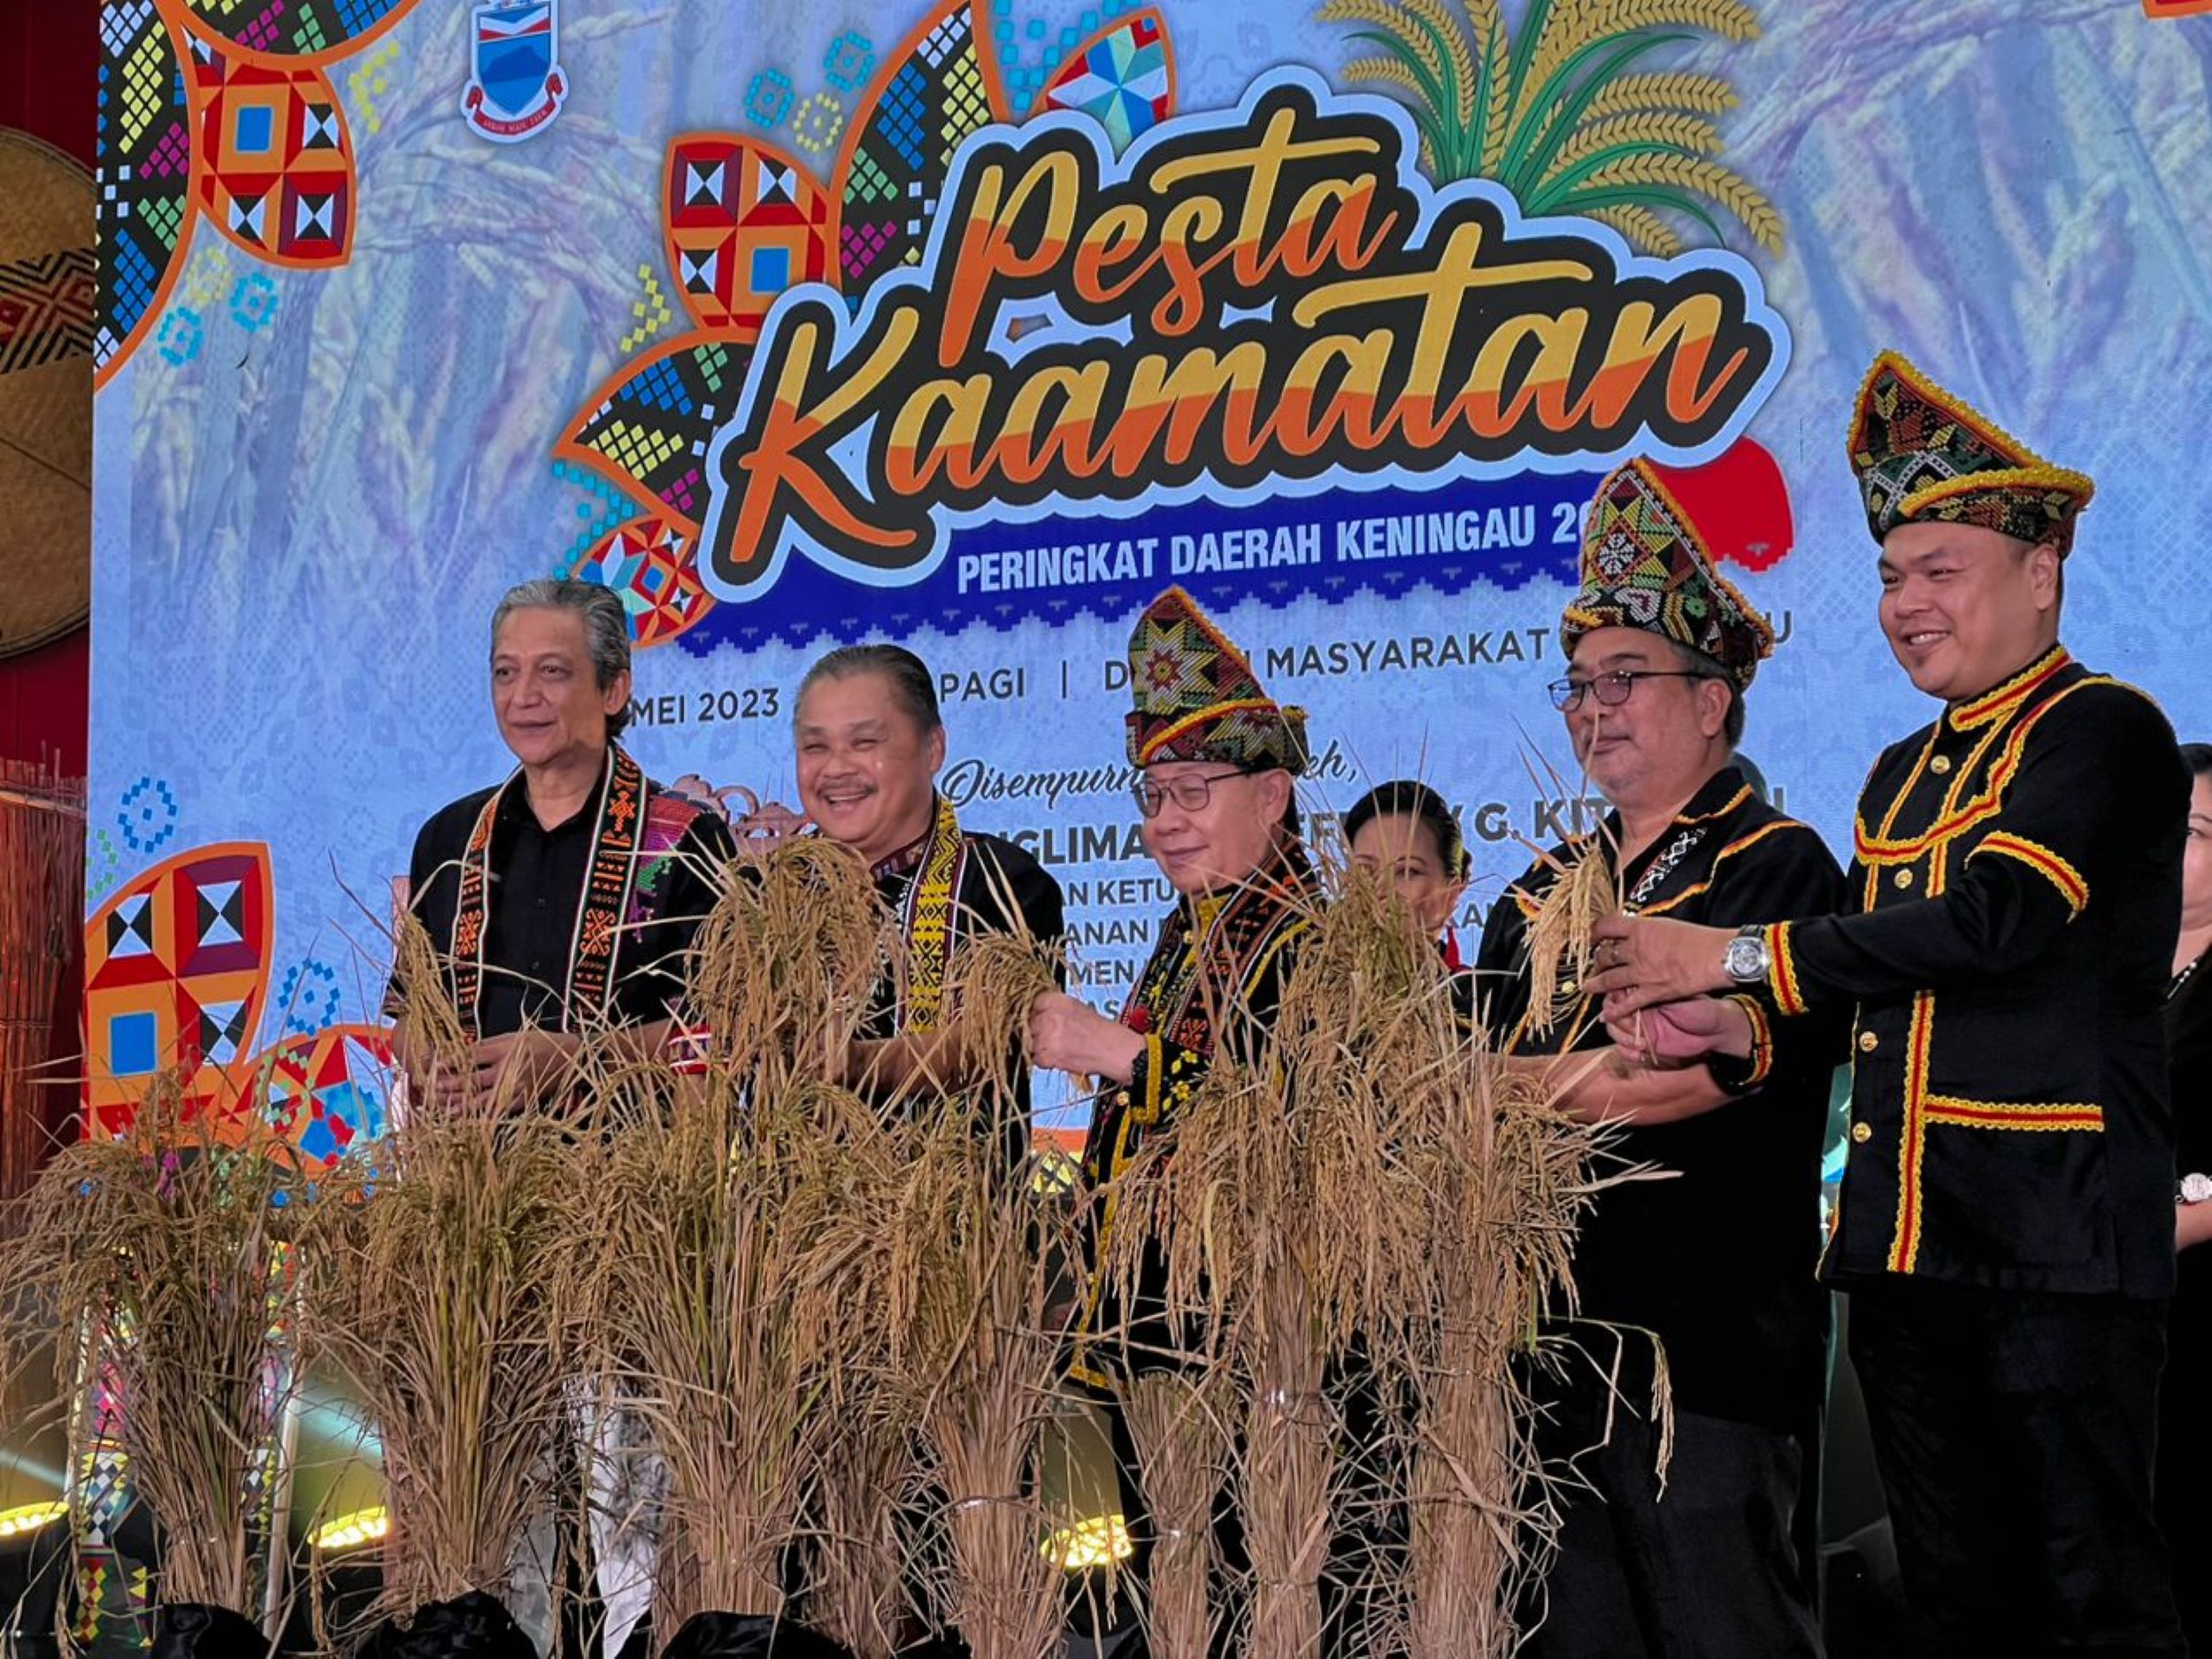 Tokoh Kaamatan contest in recognition of farmers